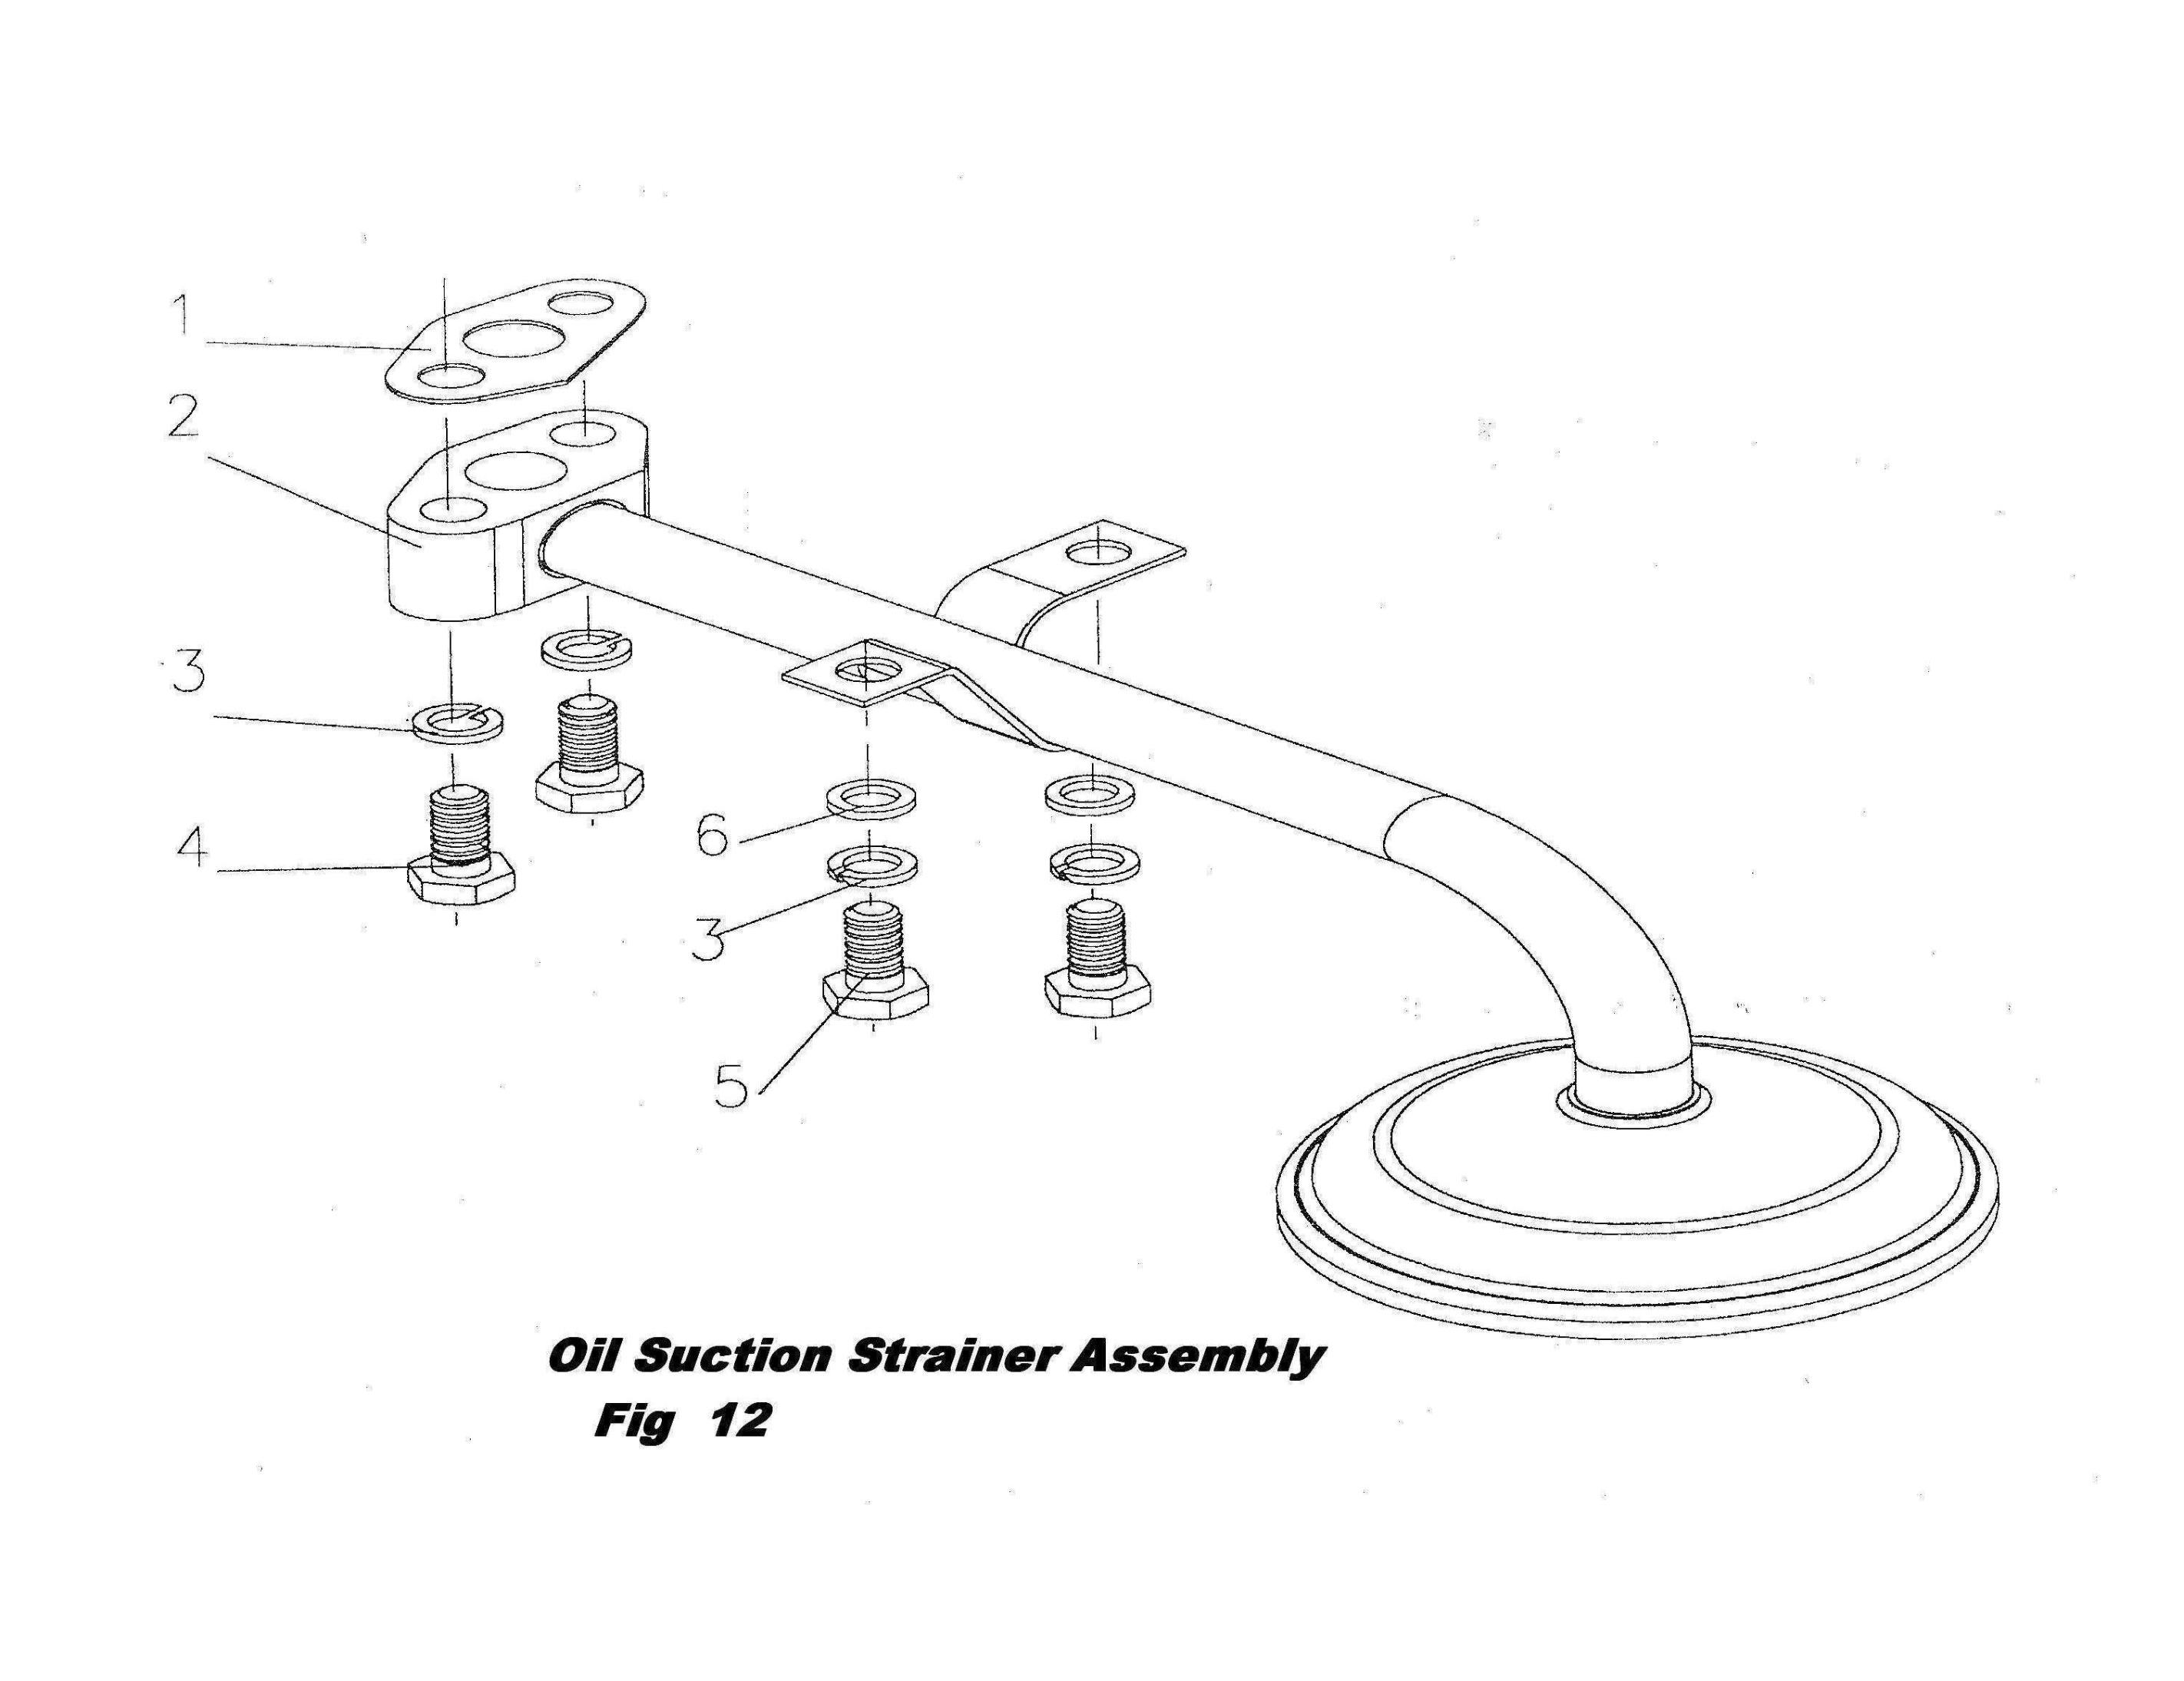 Oil Suction Stainer Assembly